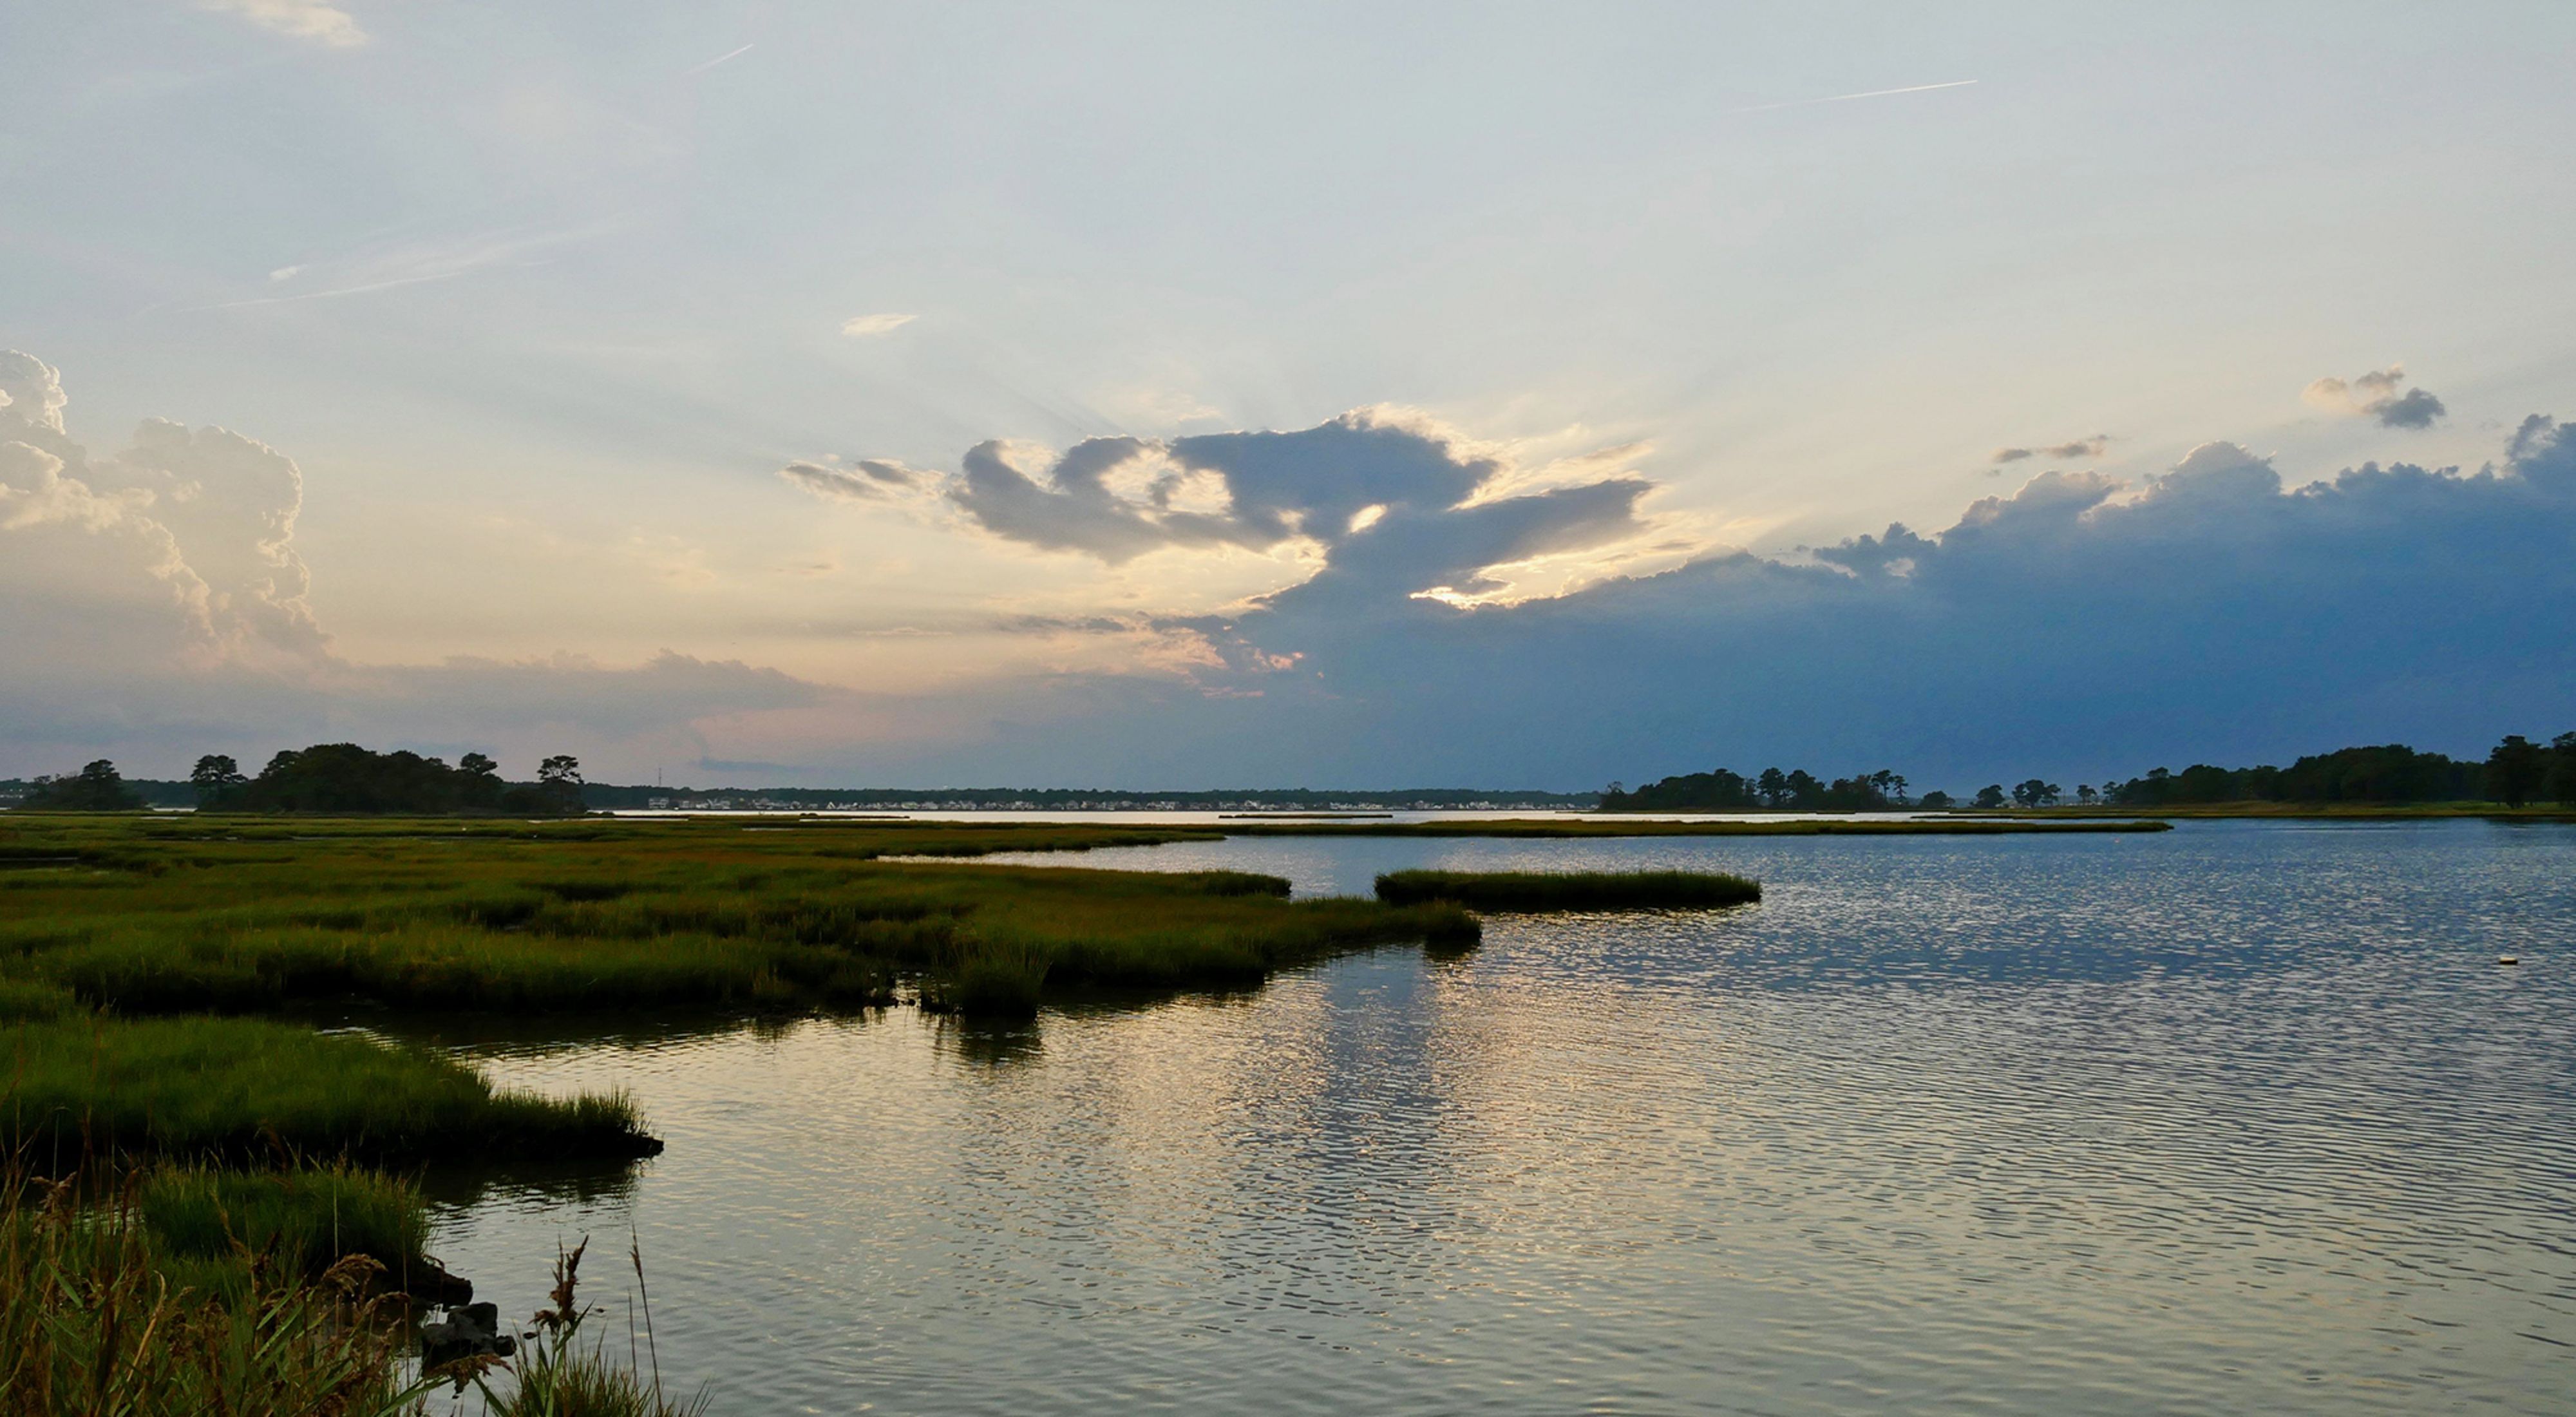 The sun sets over a wide body of water. Fingers of land covered with thick marsh grasses poke into the water. The sun is hidden behind a thick bank of clouds along the horizon.